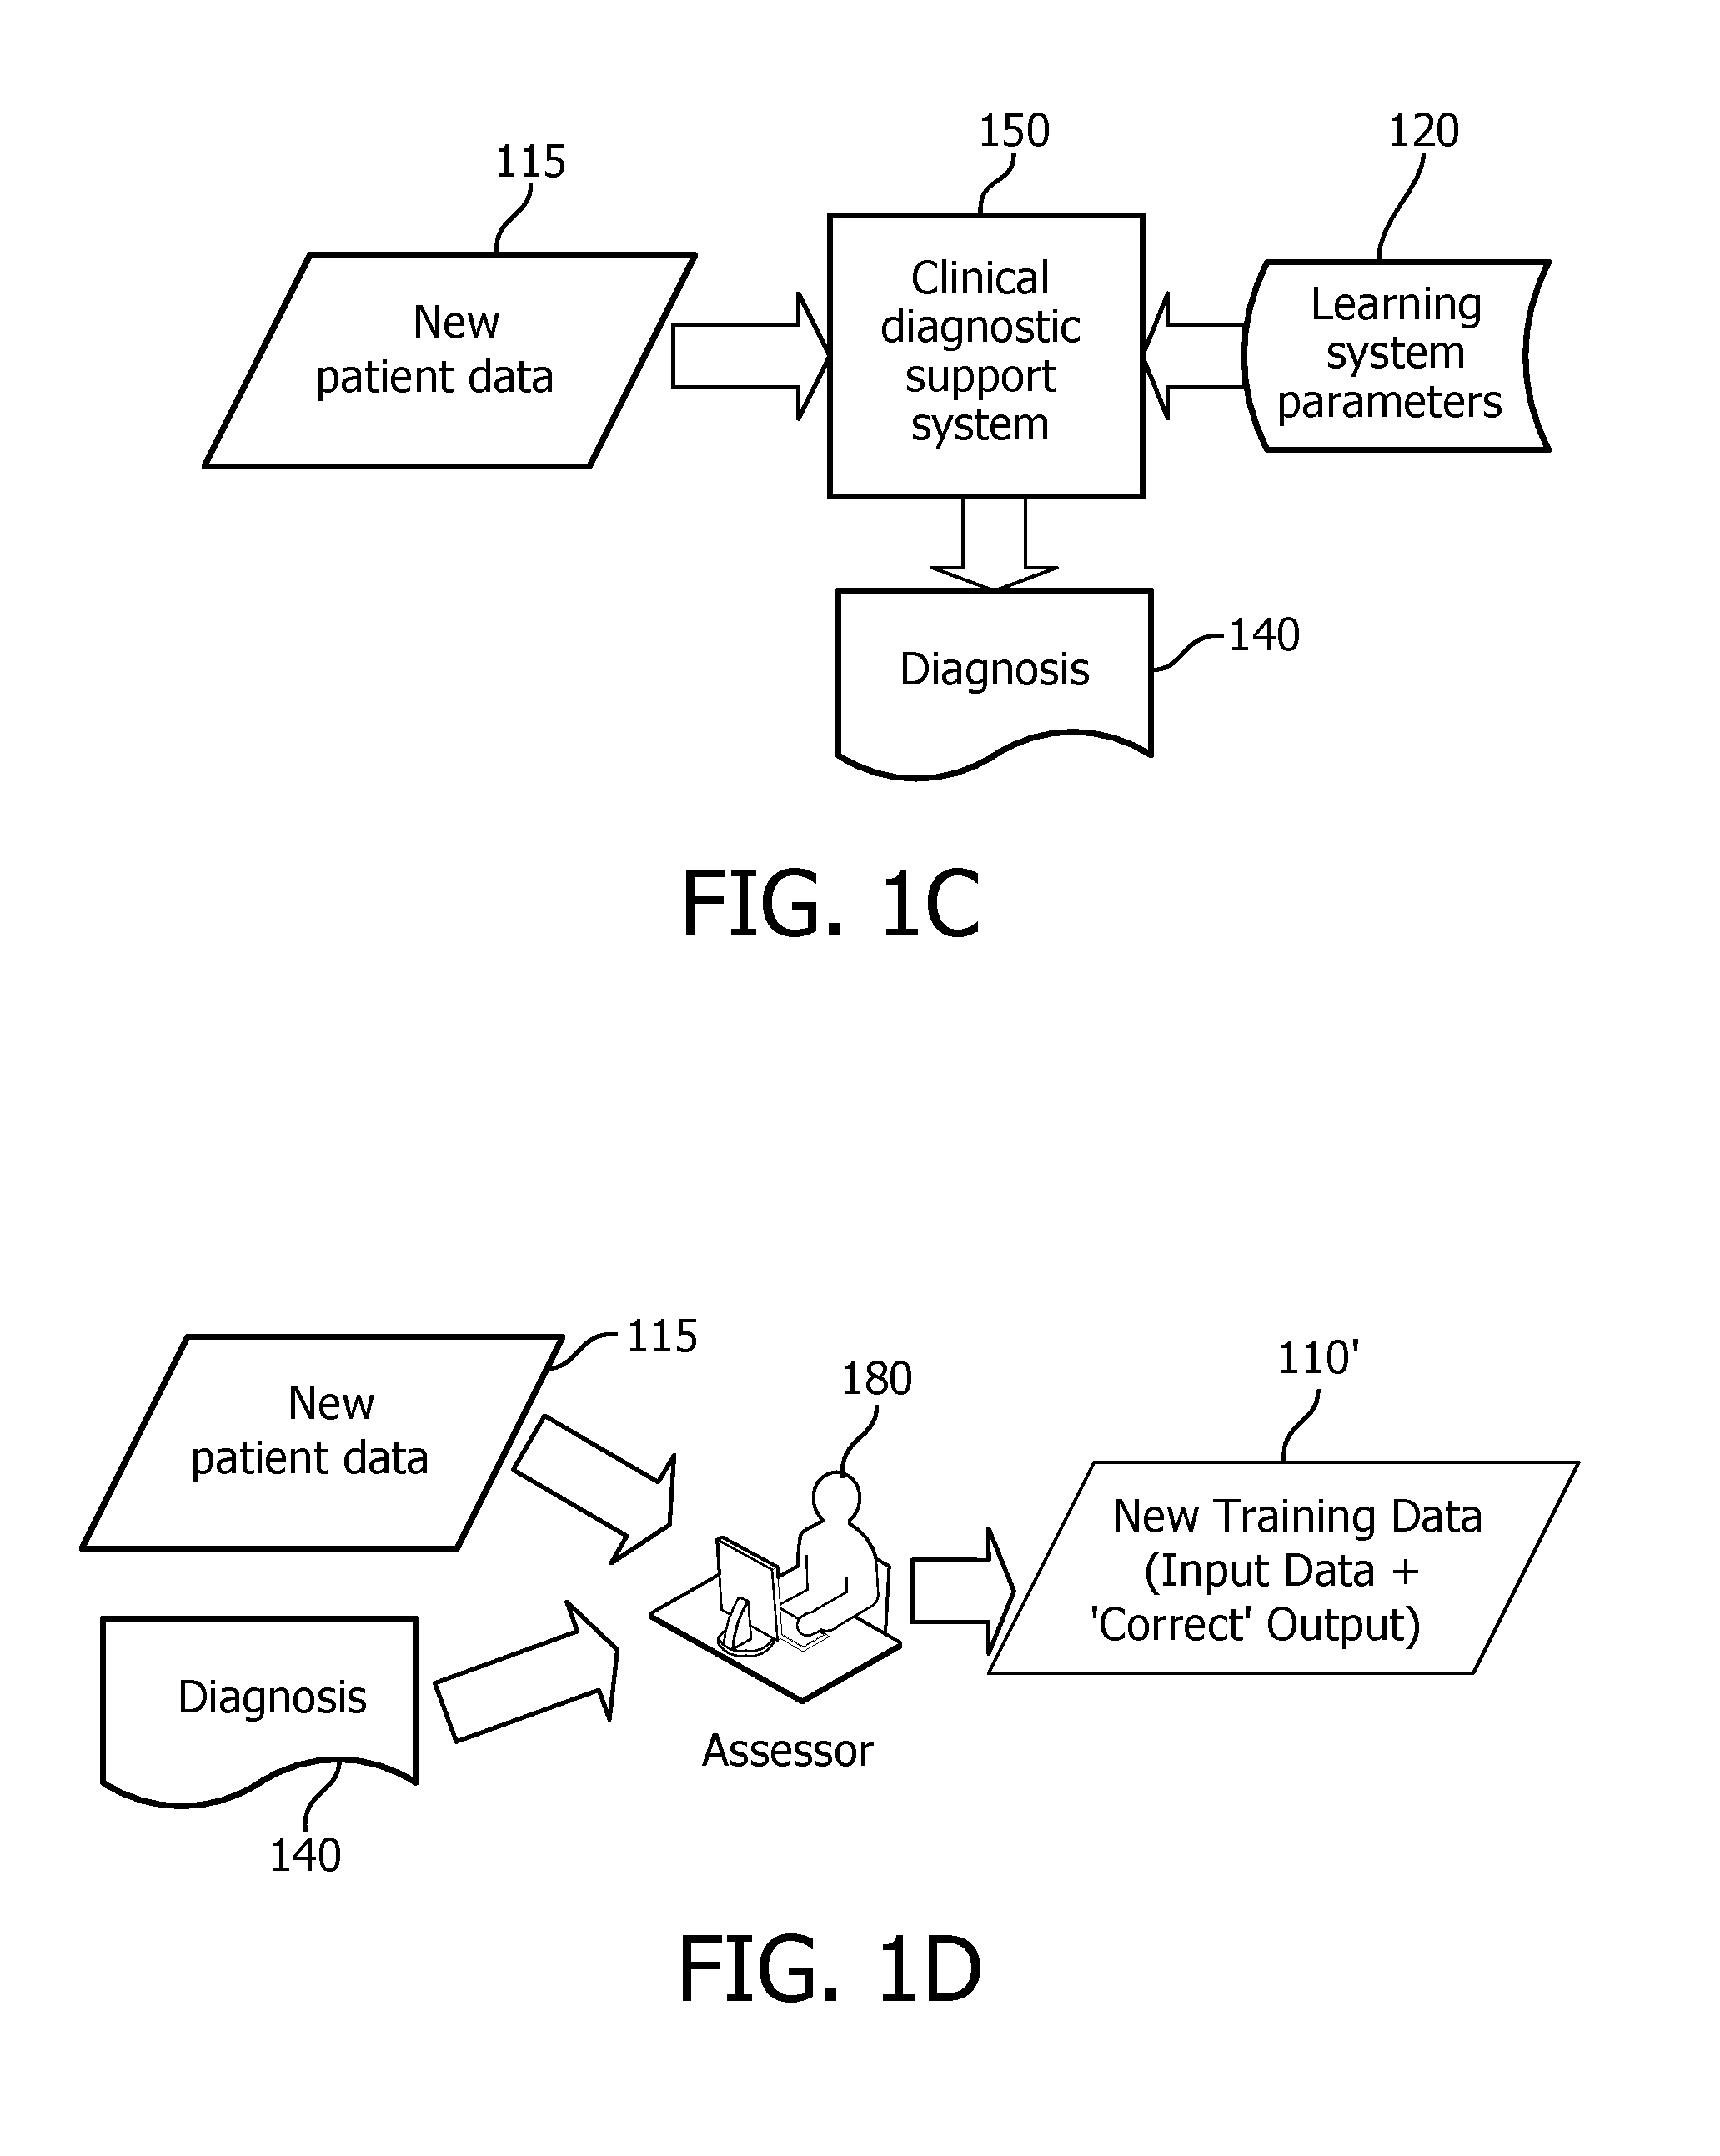 Hierarchical self-learning system for computerized clinical diagnostic support